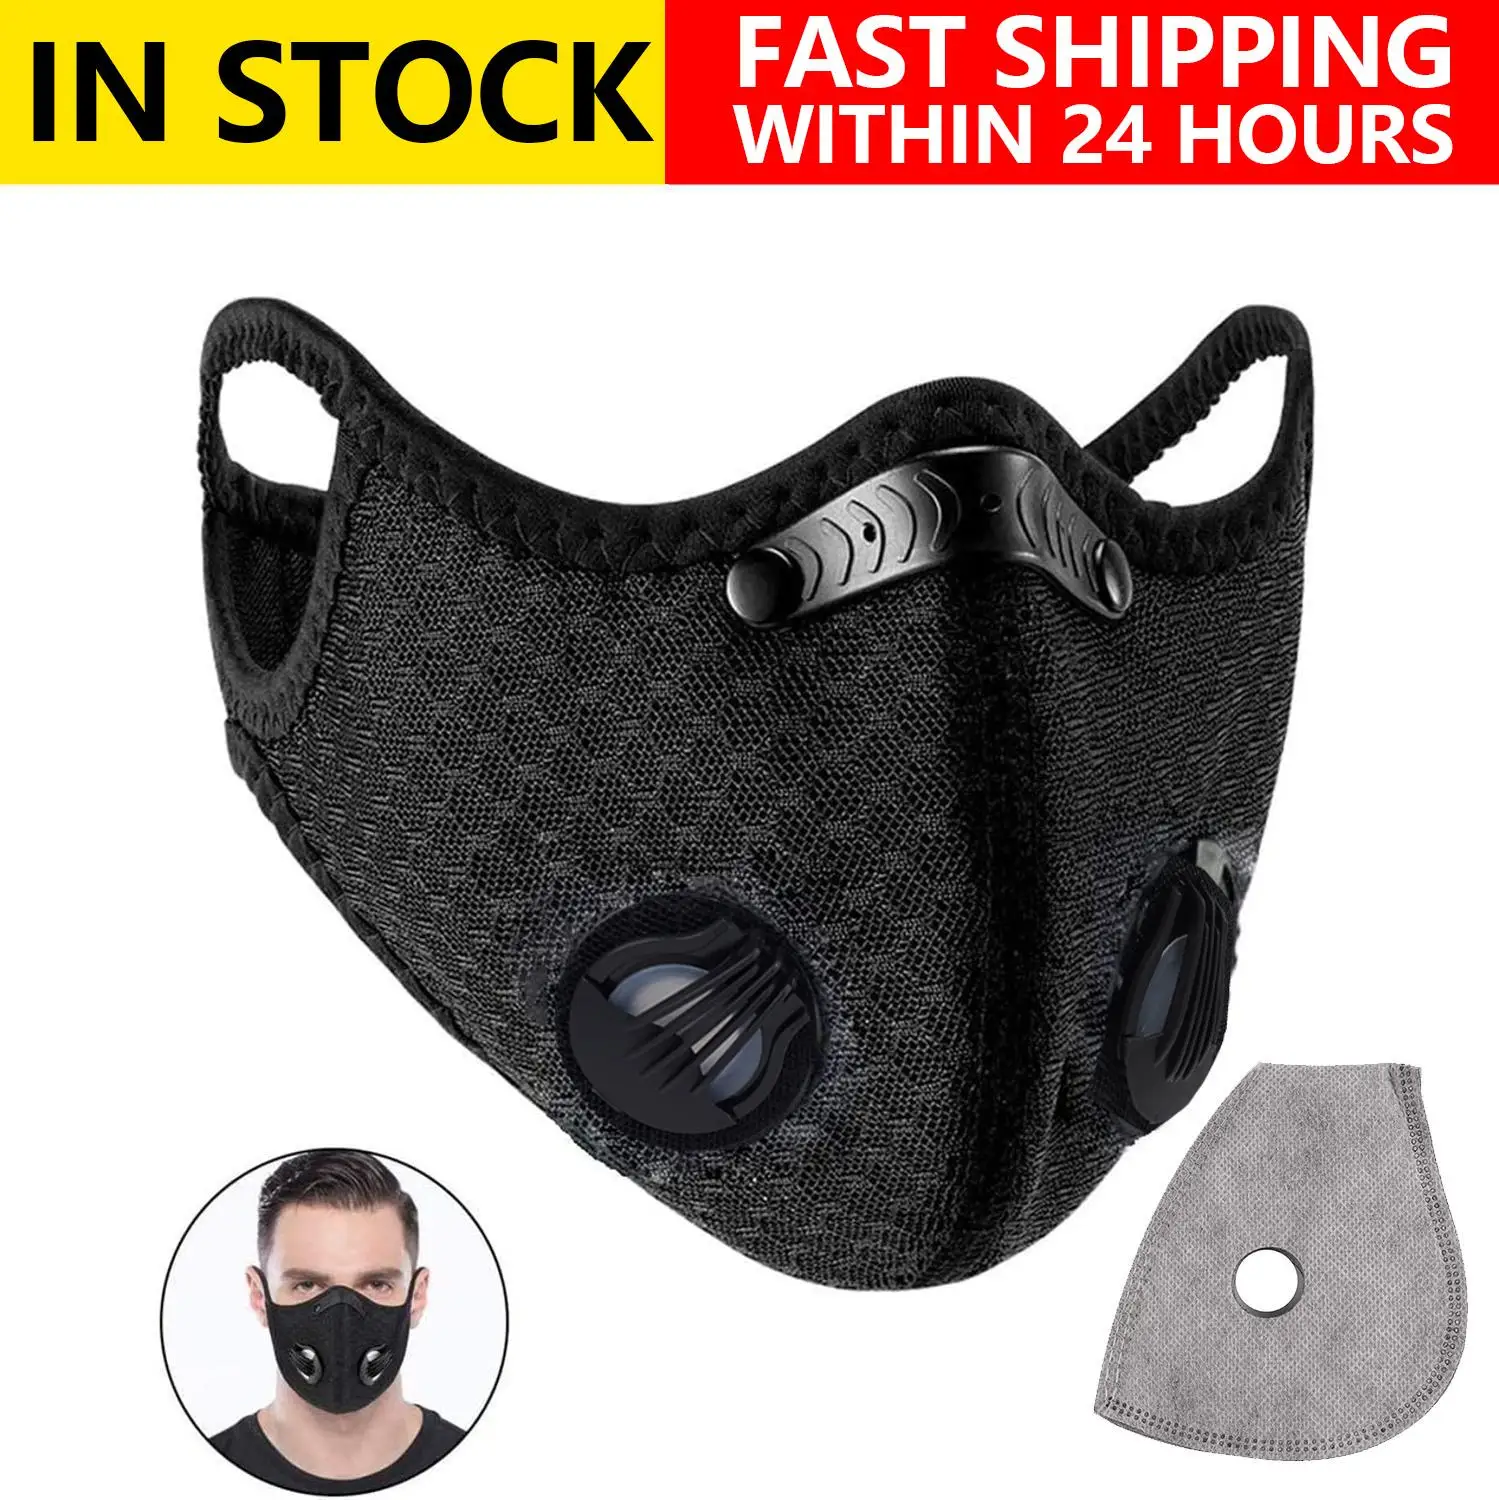 

Anrancee Face Mask With Filter Breathing Valve Activated Carbon PM 2.5 Anti Pollution Bicycle Cycling Protection Bike Dust Mask